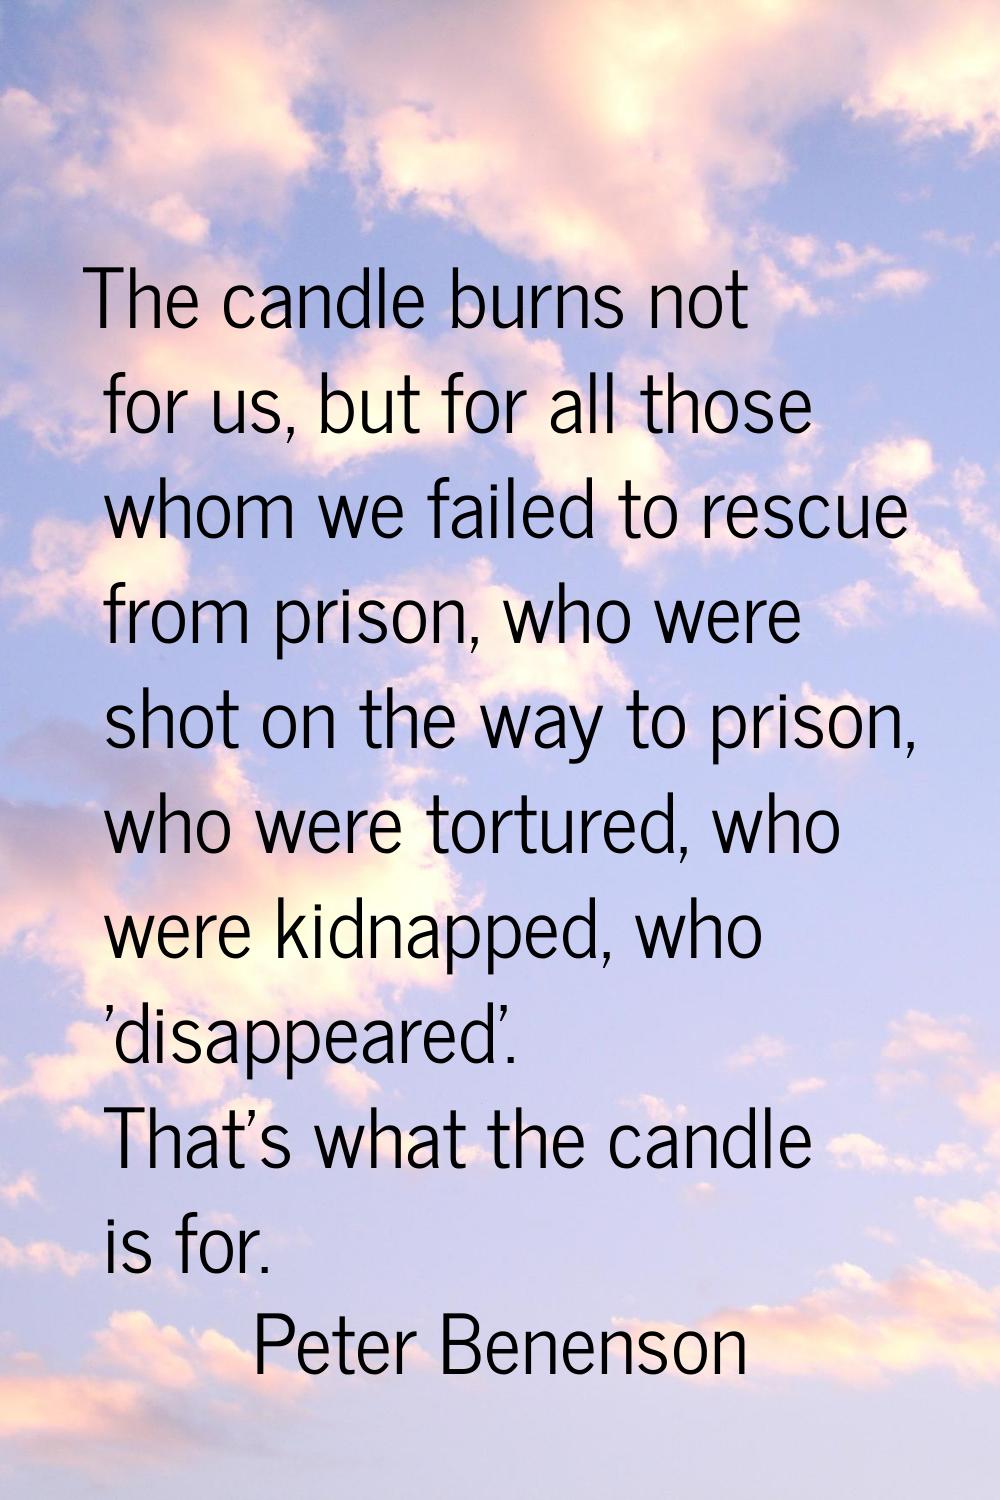 The candle burns not for us, but for all those whom we failed to rescue from prison, who were shot 